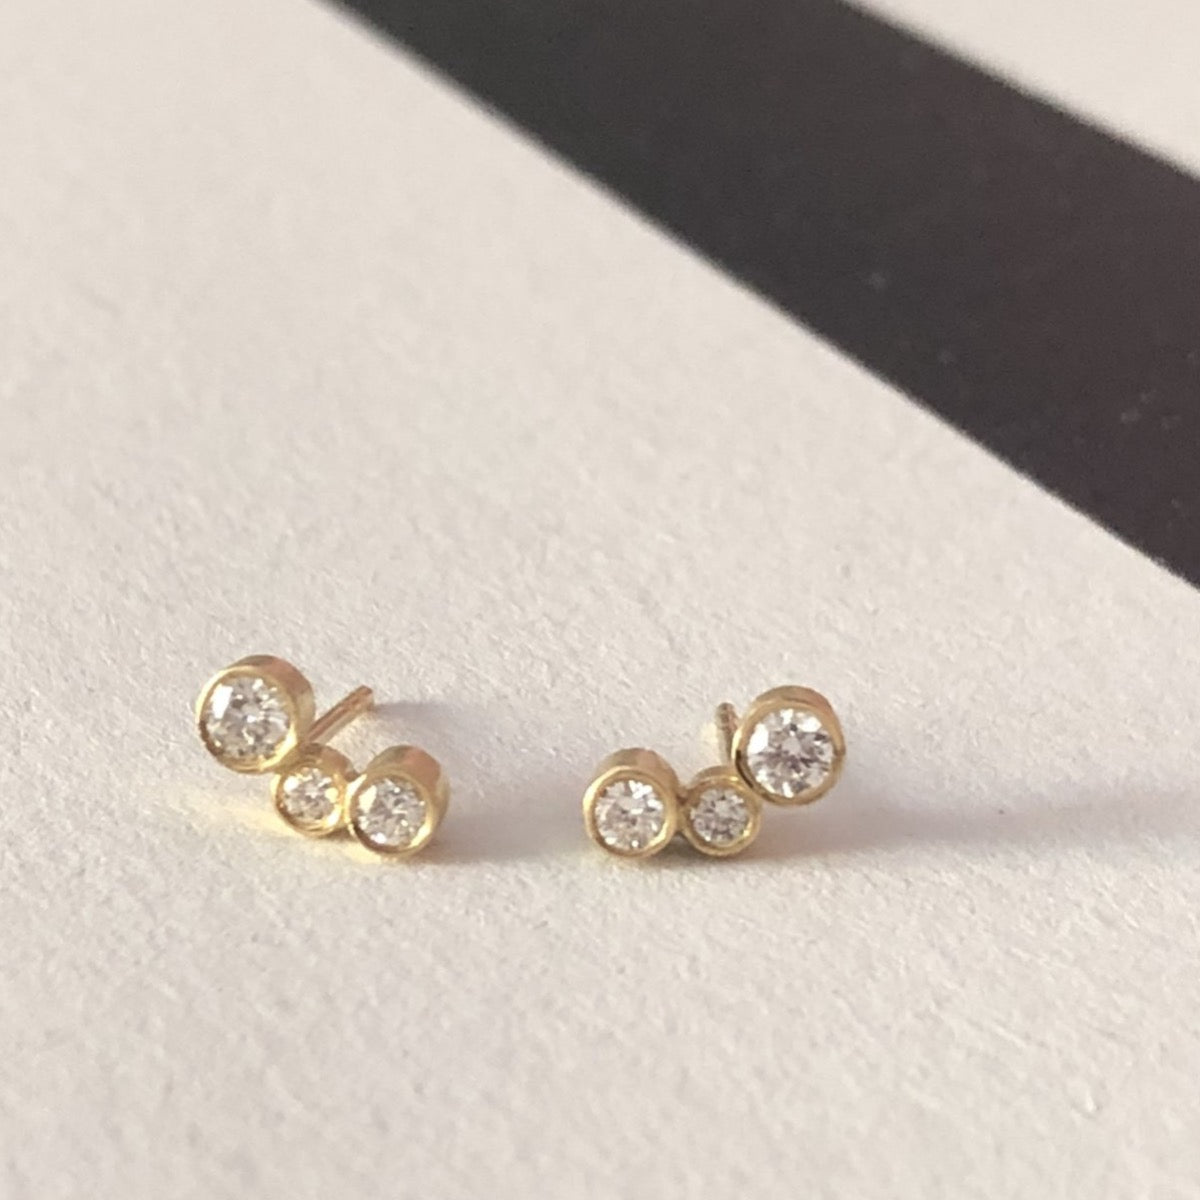 LineUp earrings in 18kt. gold and diamonds